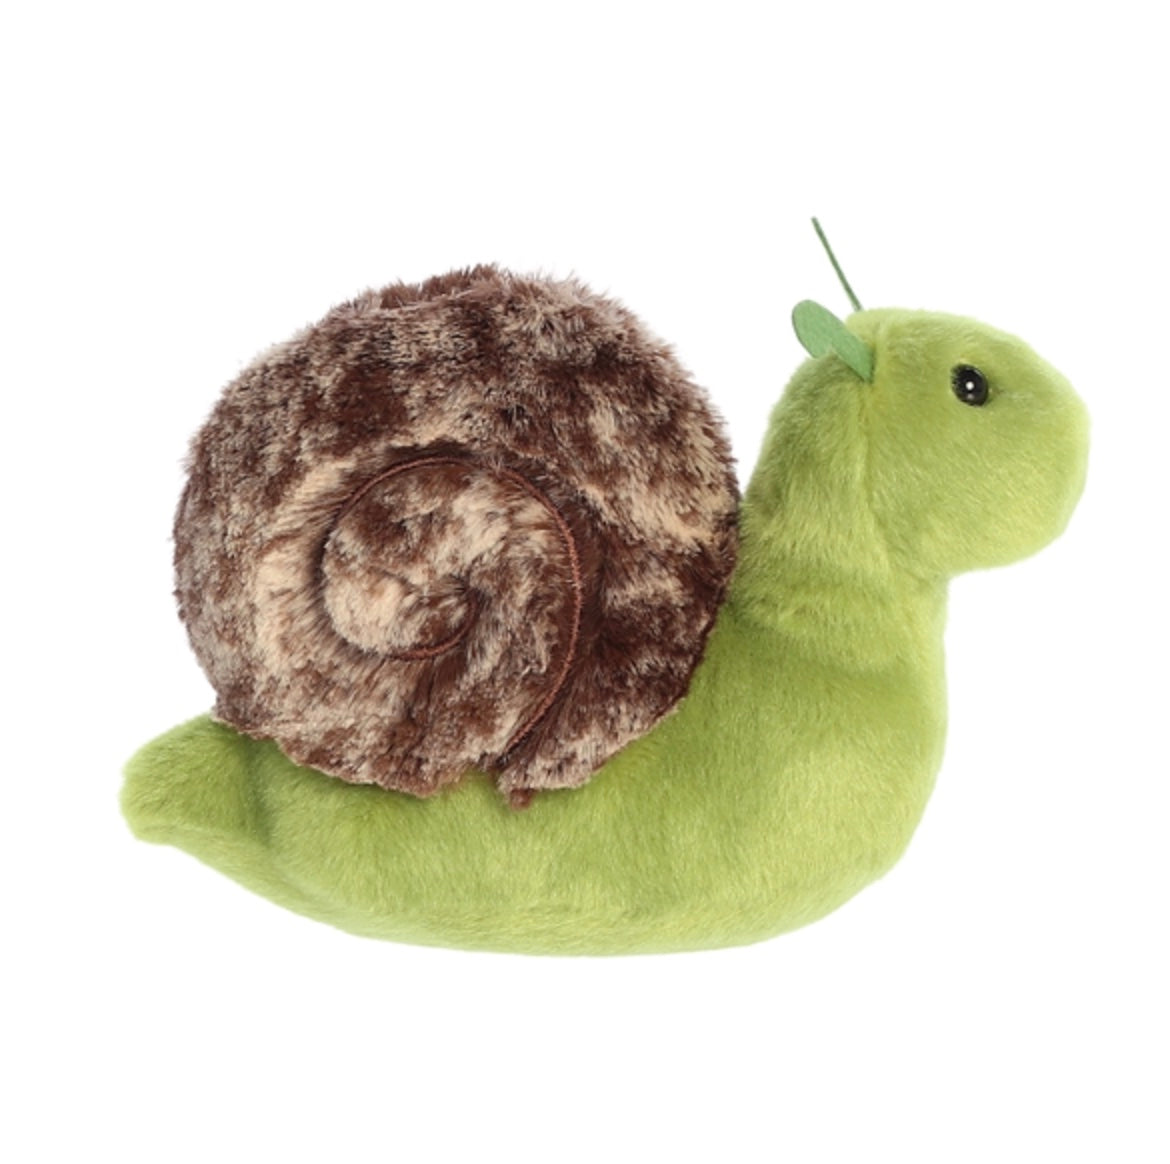 Hardcover Book w/Snail Plushie